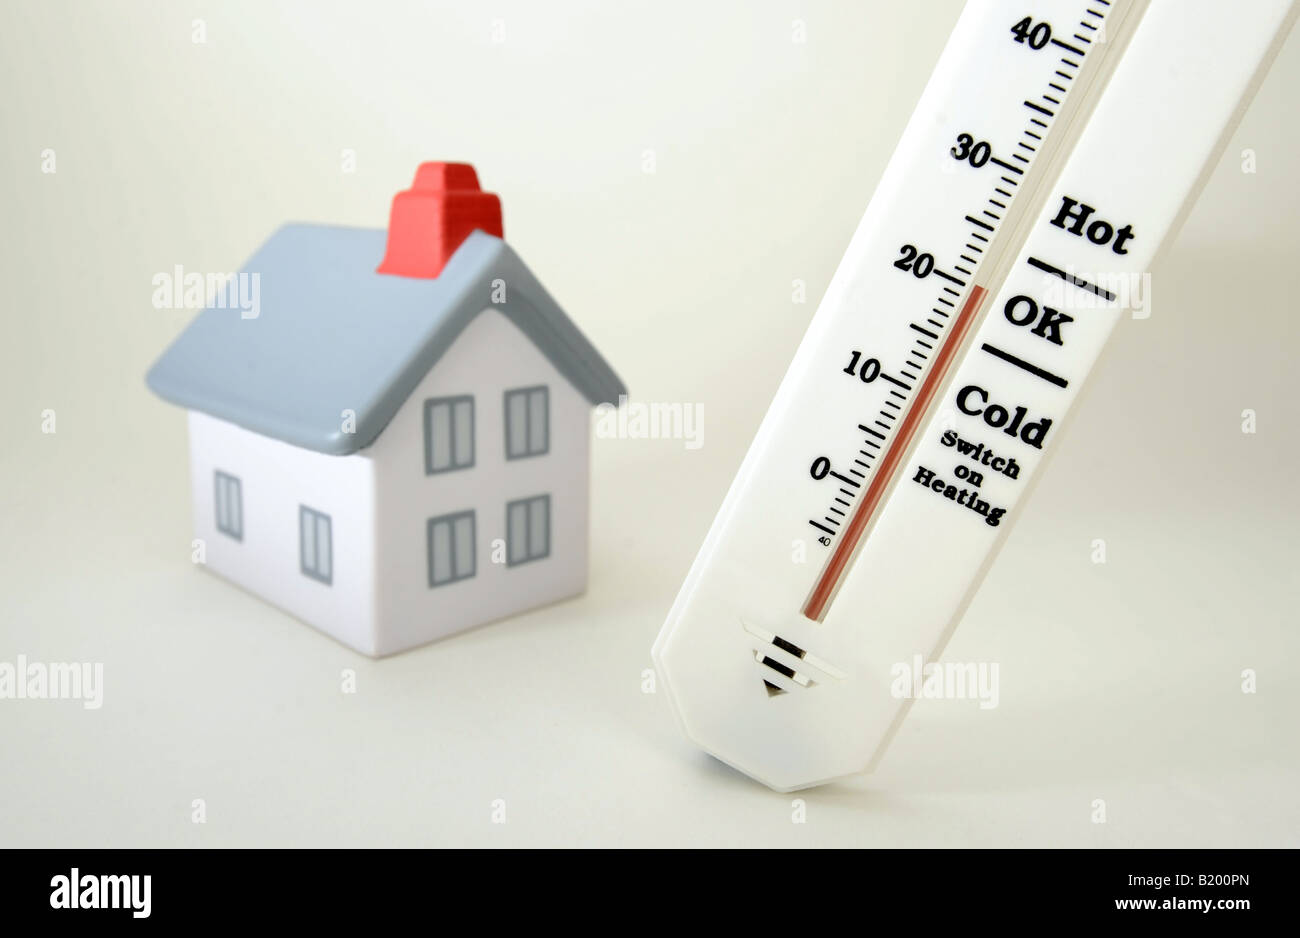 https://c8.alamy.com/comp/B200PN/house-with-thermometer-showing-20-degrees-celciusroom-temperature-B200PN.jpg